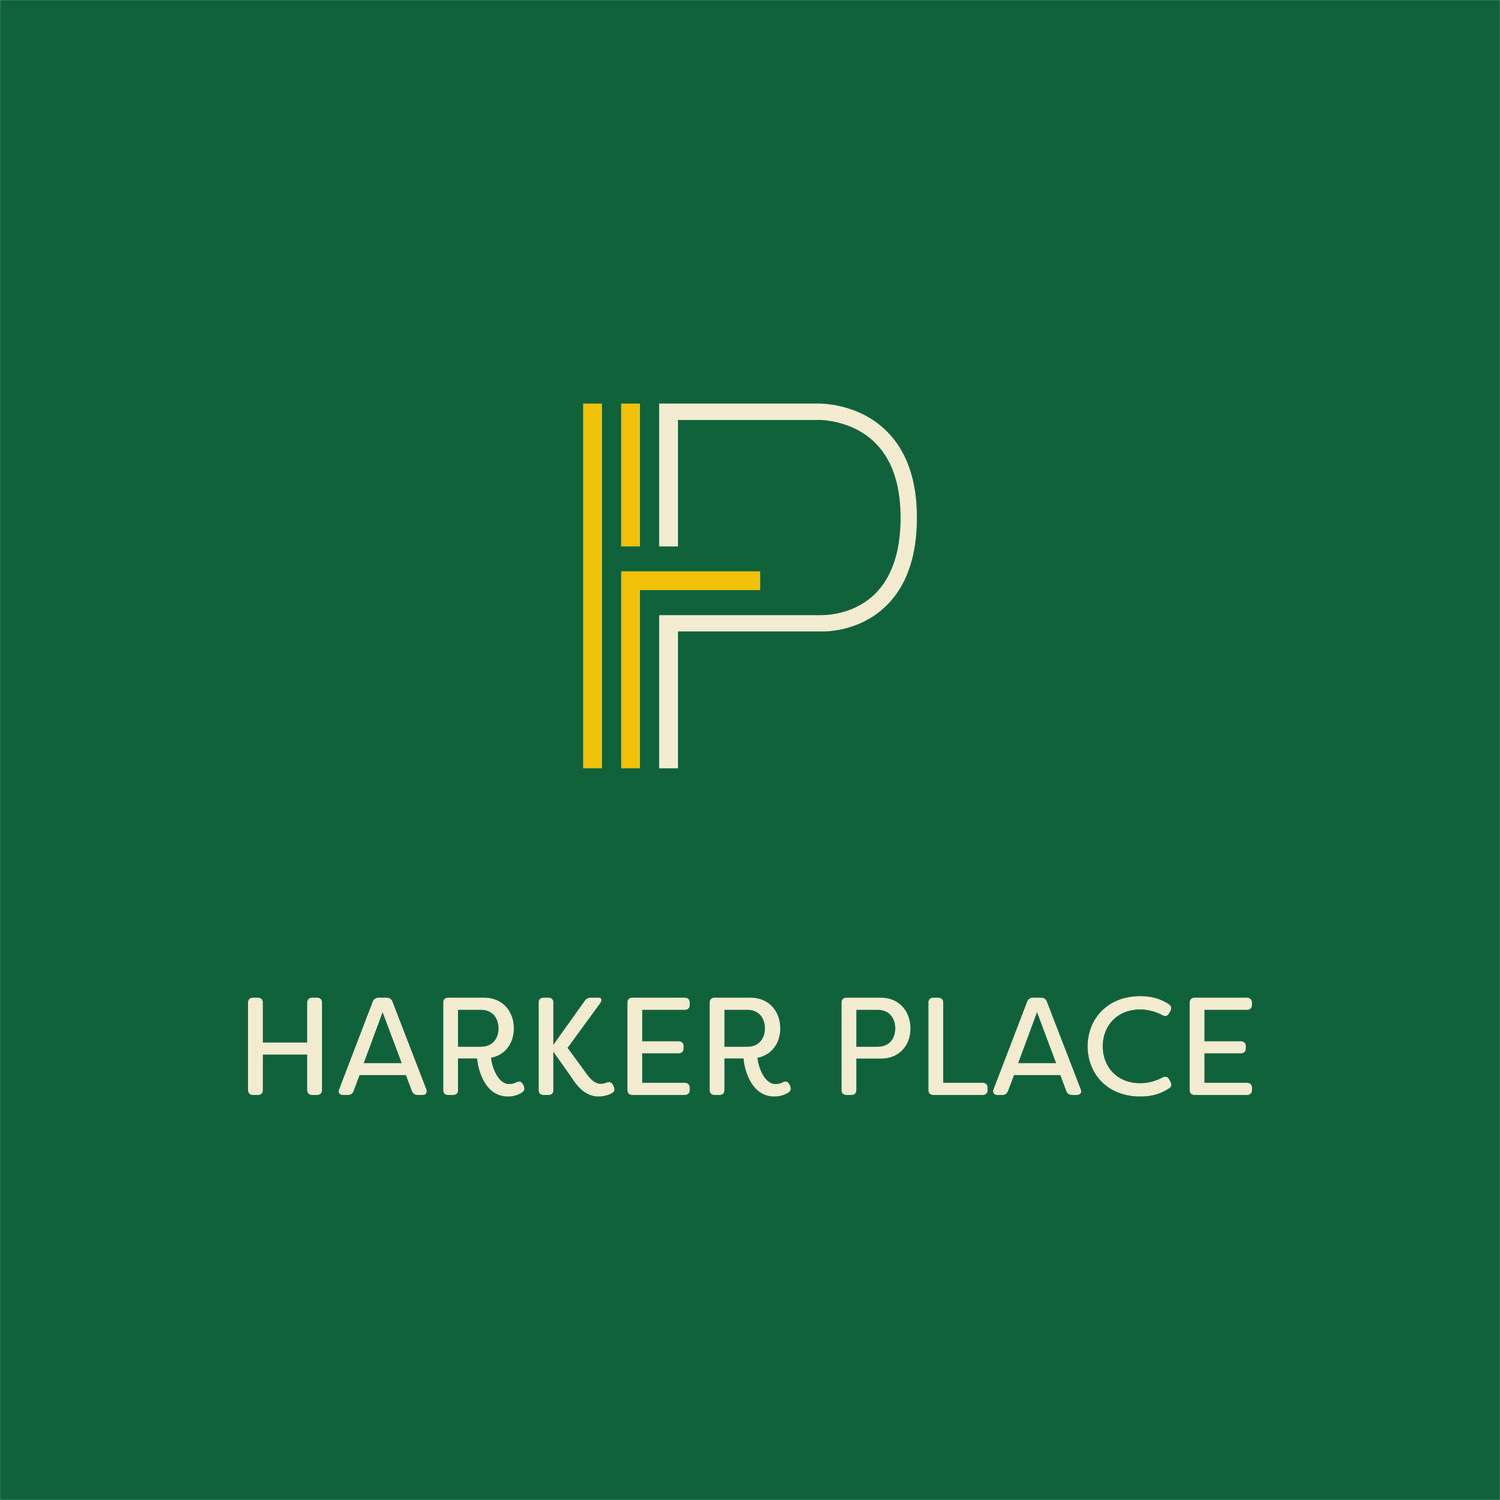 The Harker Place